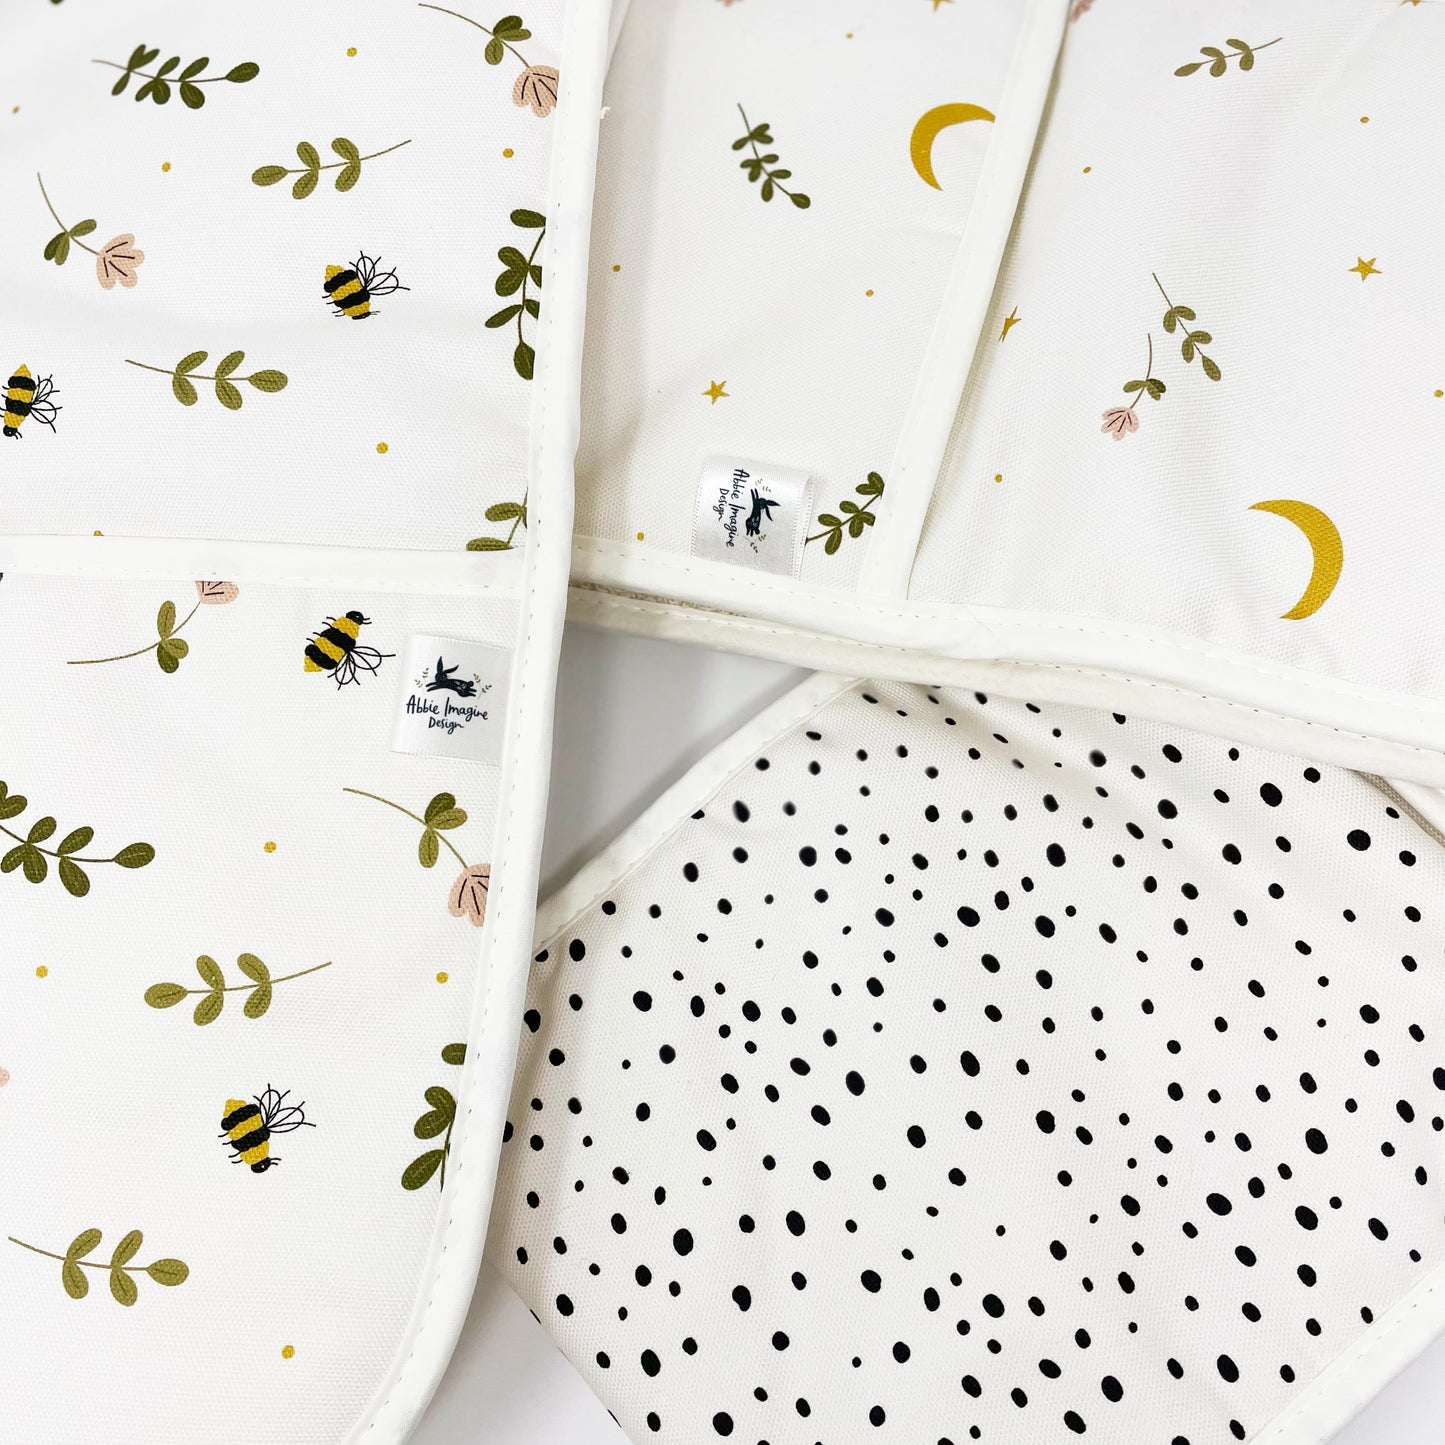 Polka dot, bees and moons oven gloves by Abbie Imagine